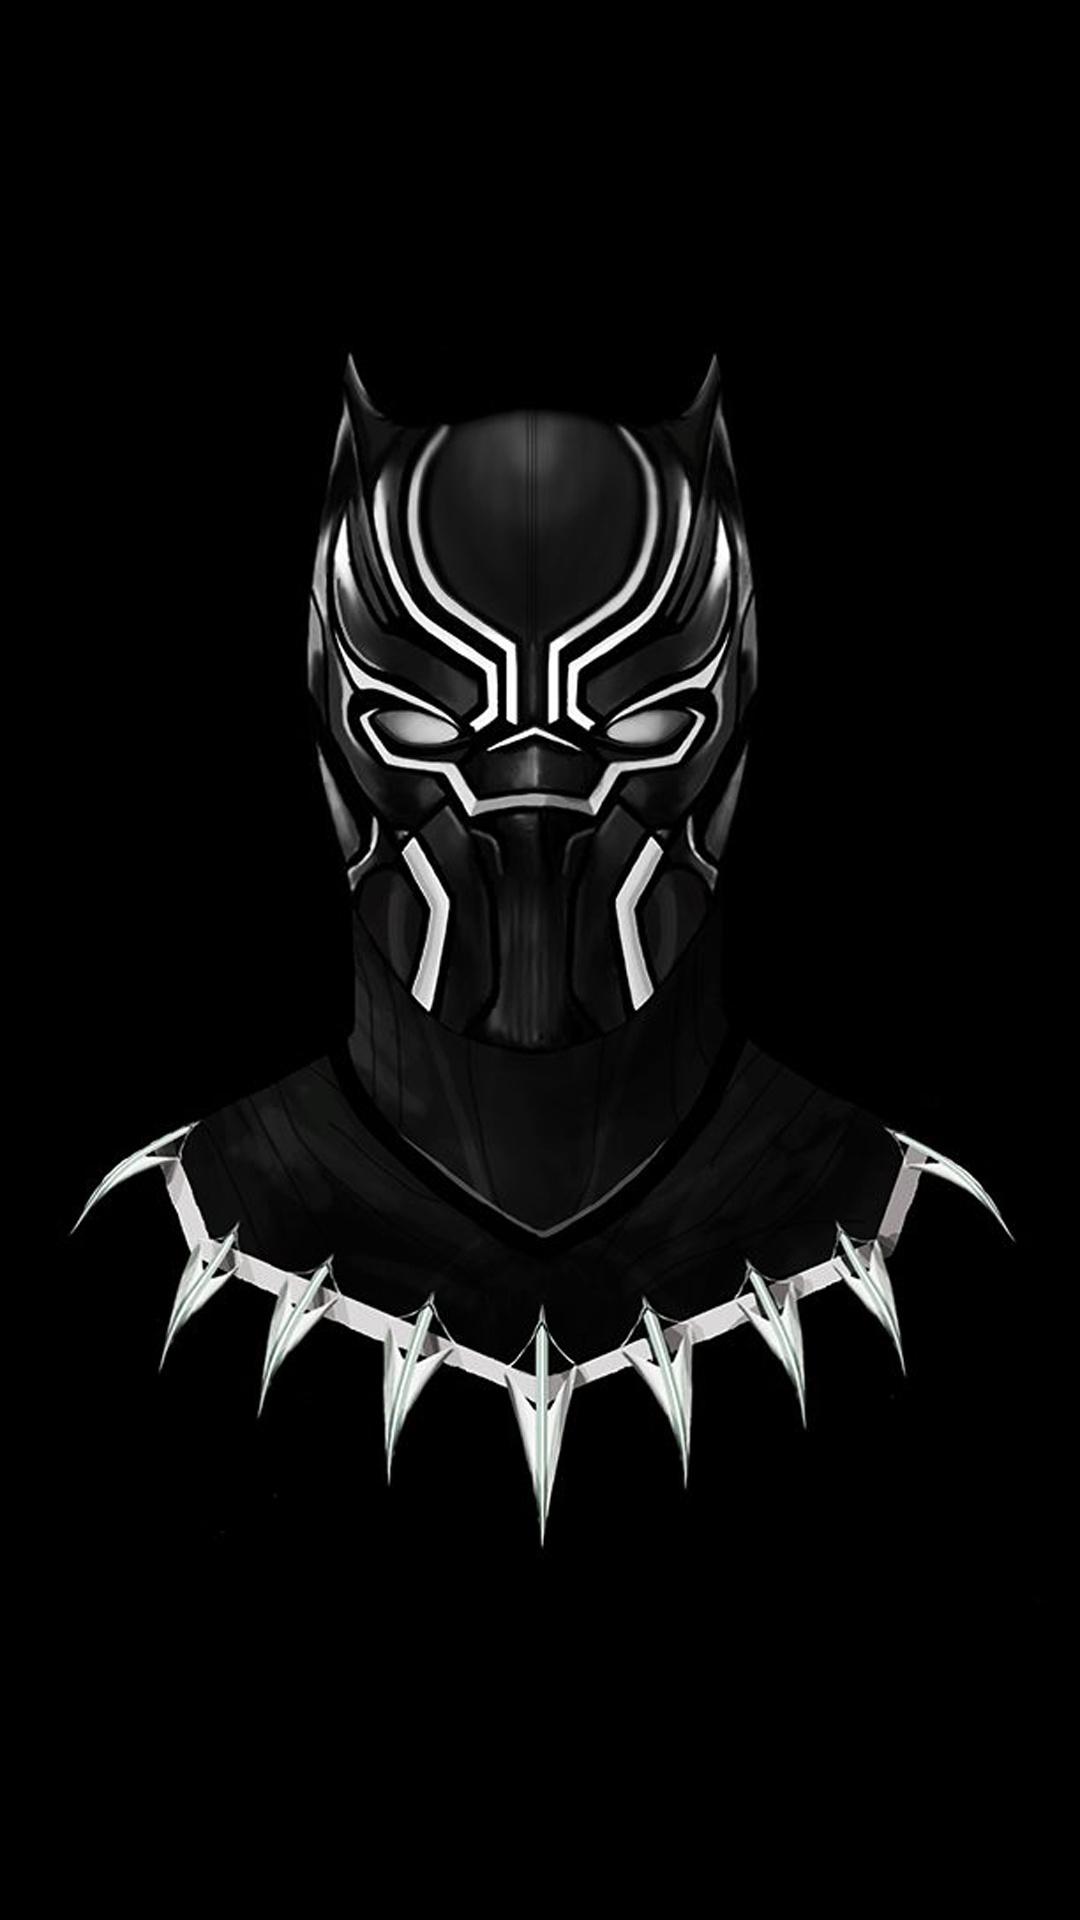 Black Panther Wallpaper for iPhone X, 6